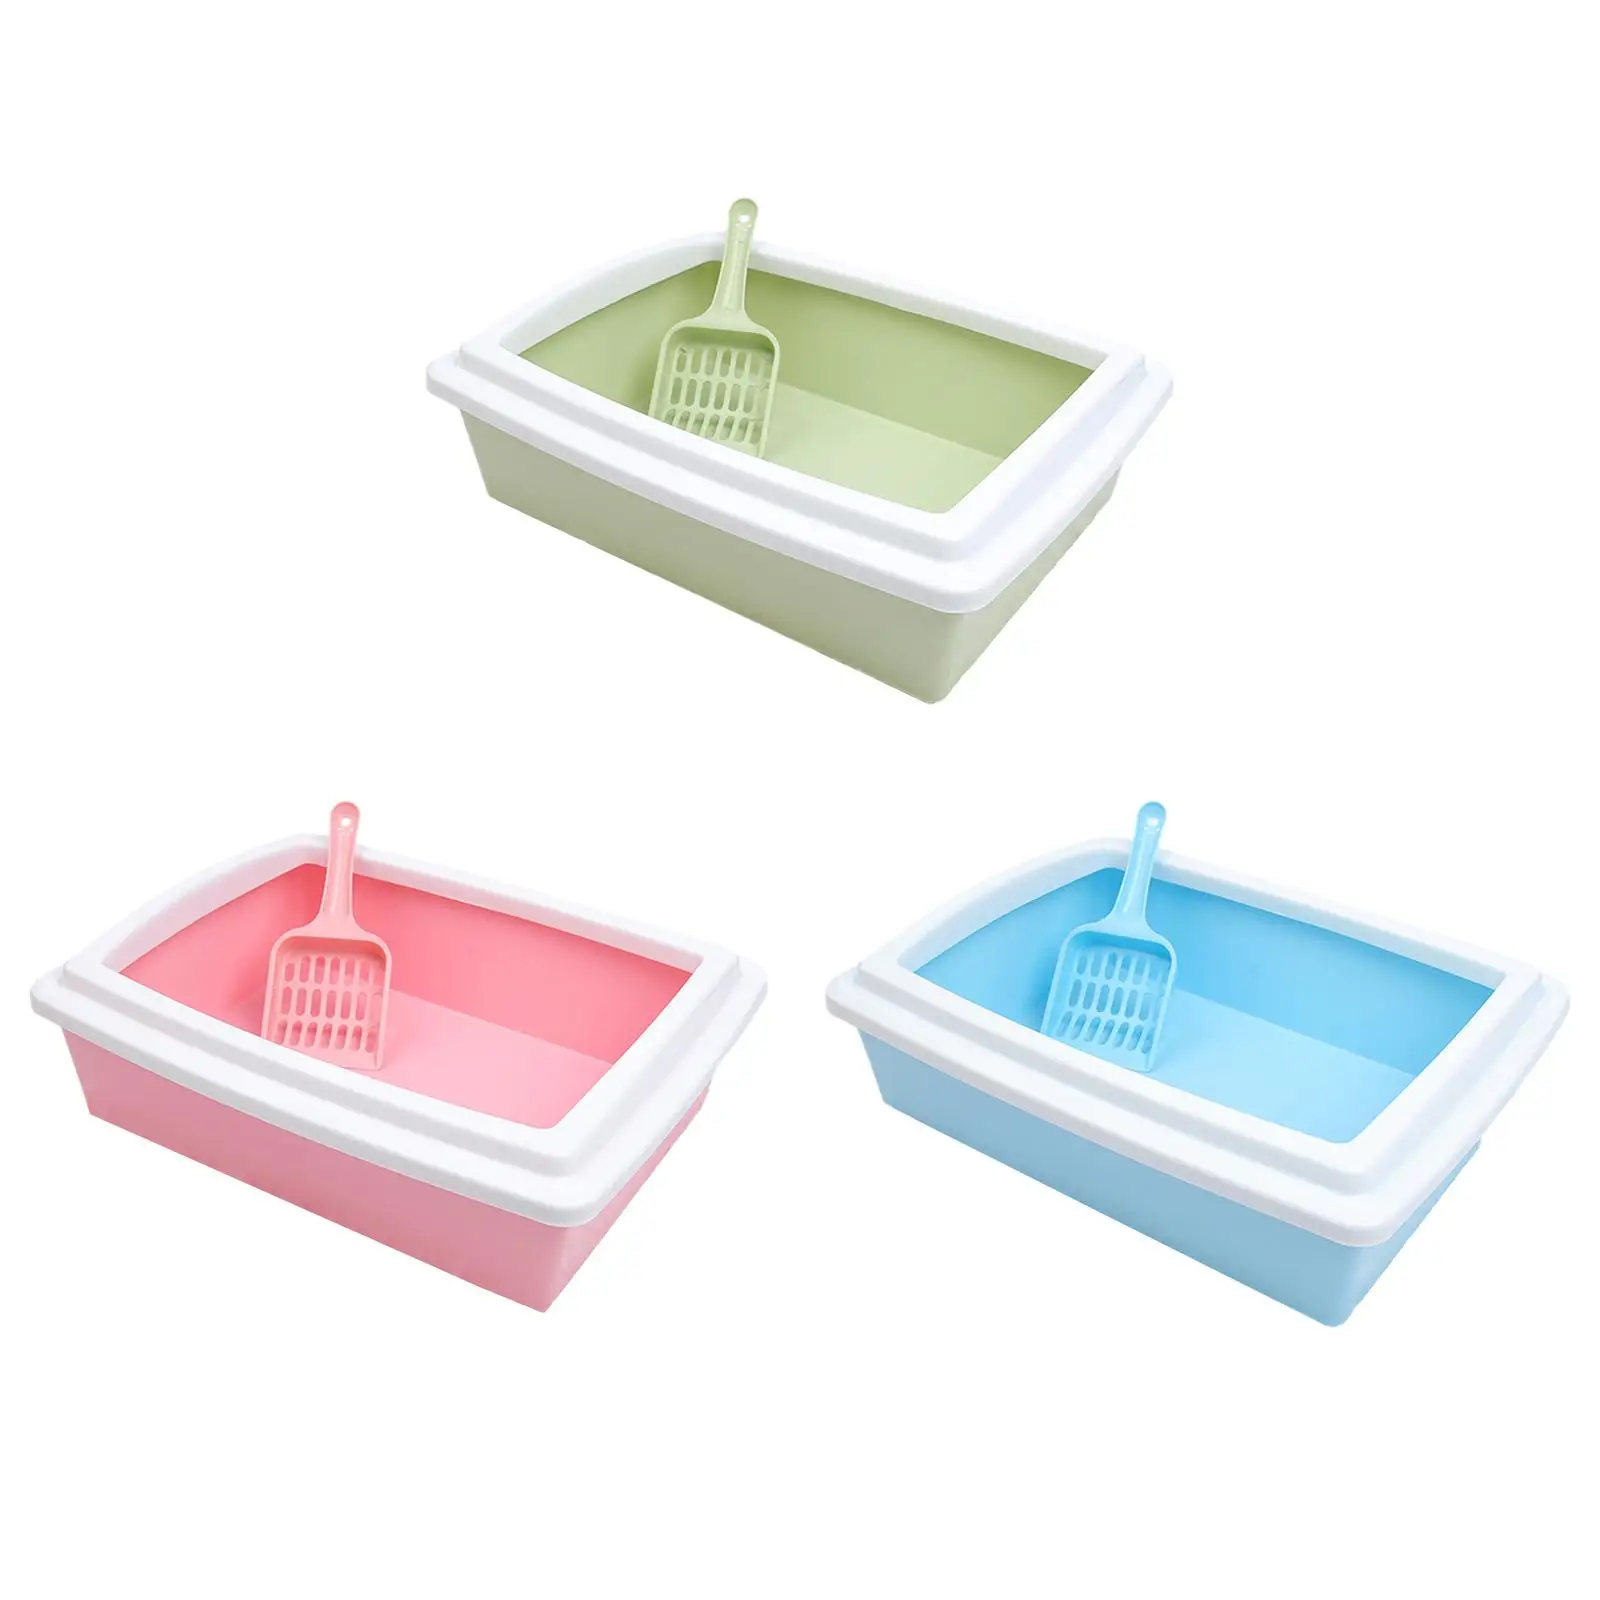 Cat Litter Tray Portable Splashproof Easy Clean Cat Litter Container Kitty Litter Pan Open Top Pet Litter Tray with High Side